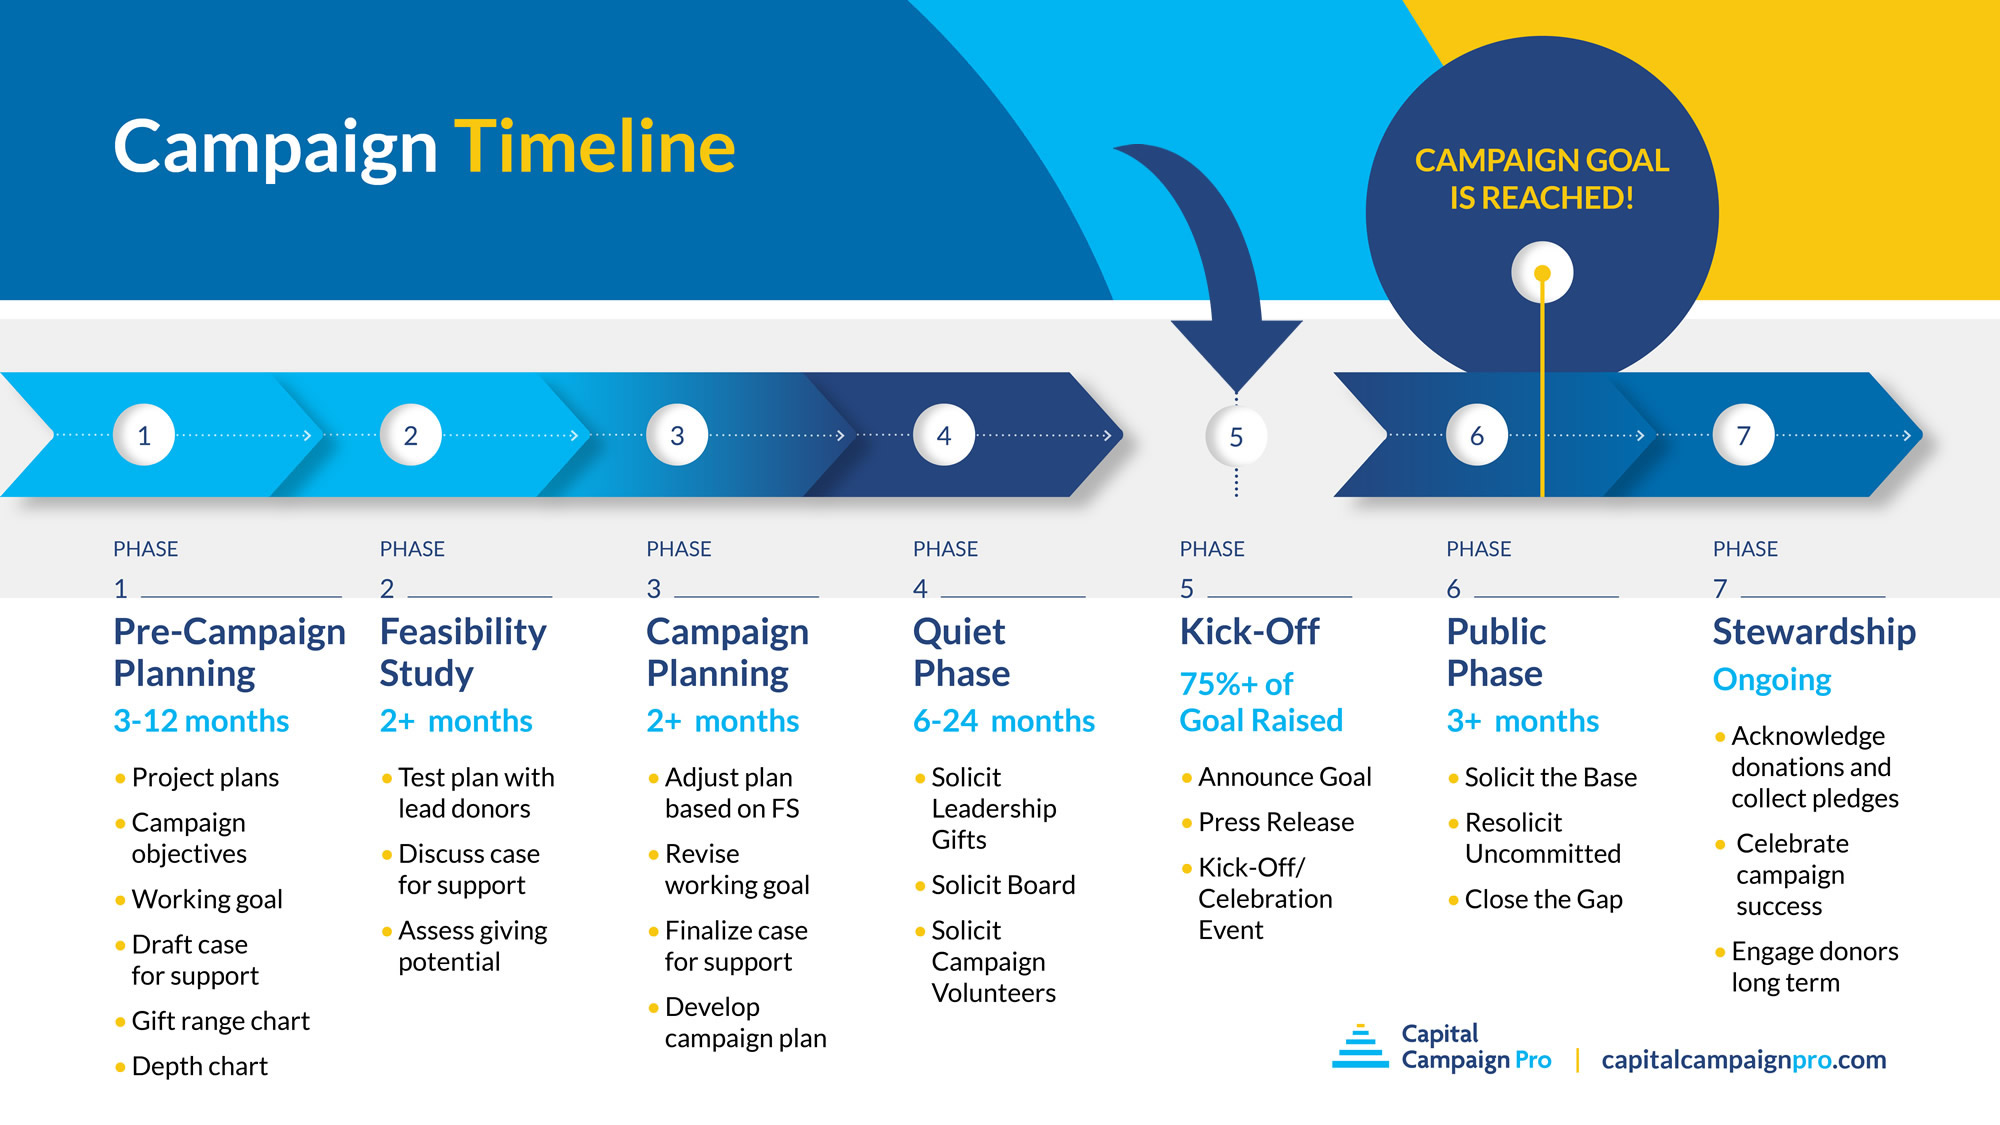 Capital Campaign Phases: When to Create a Campaign Brochure